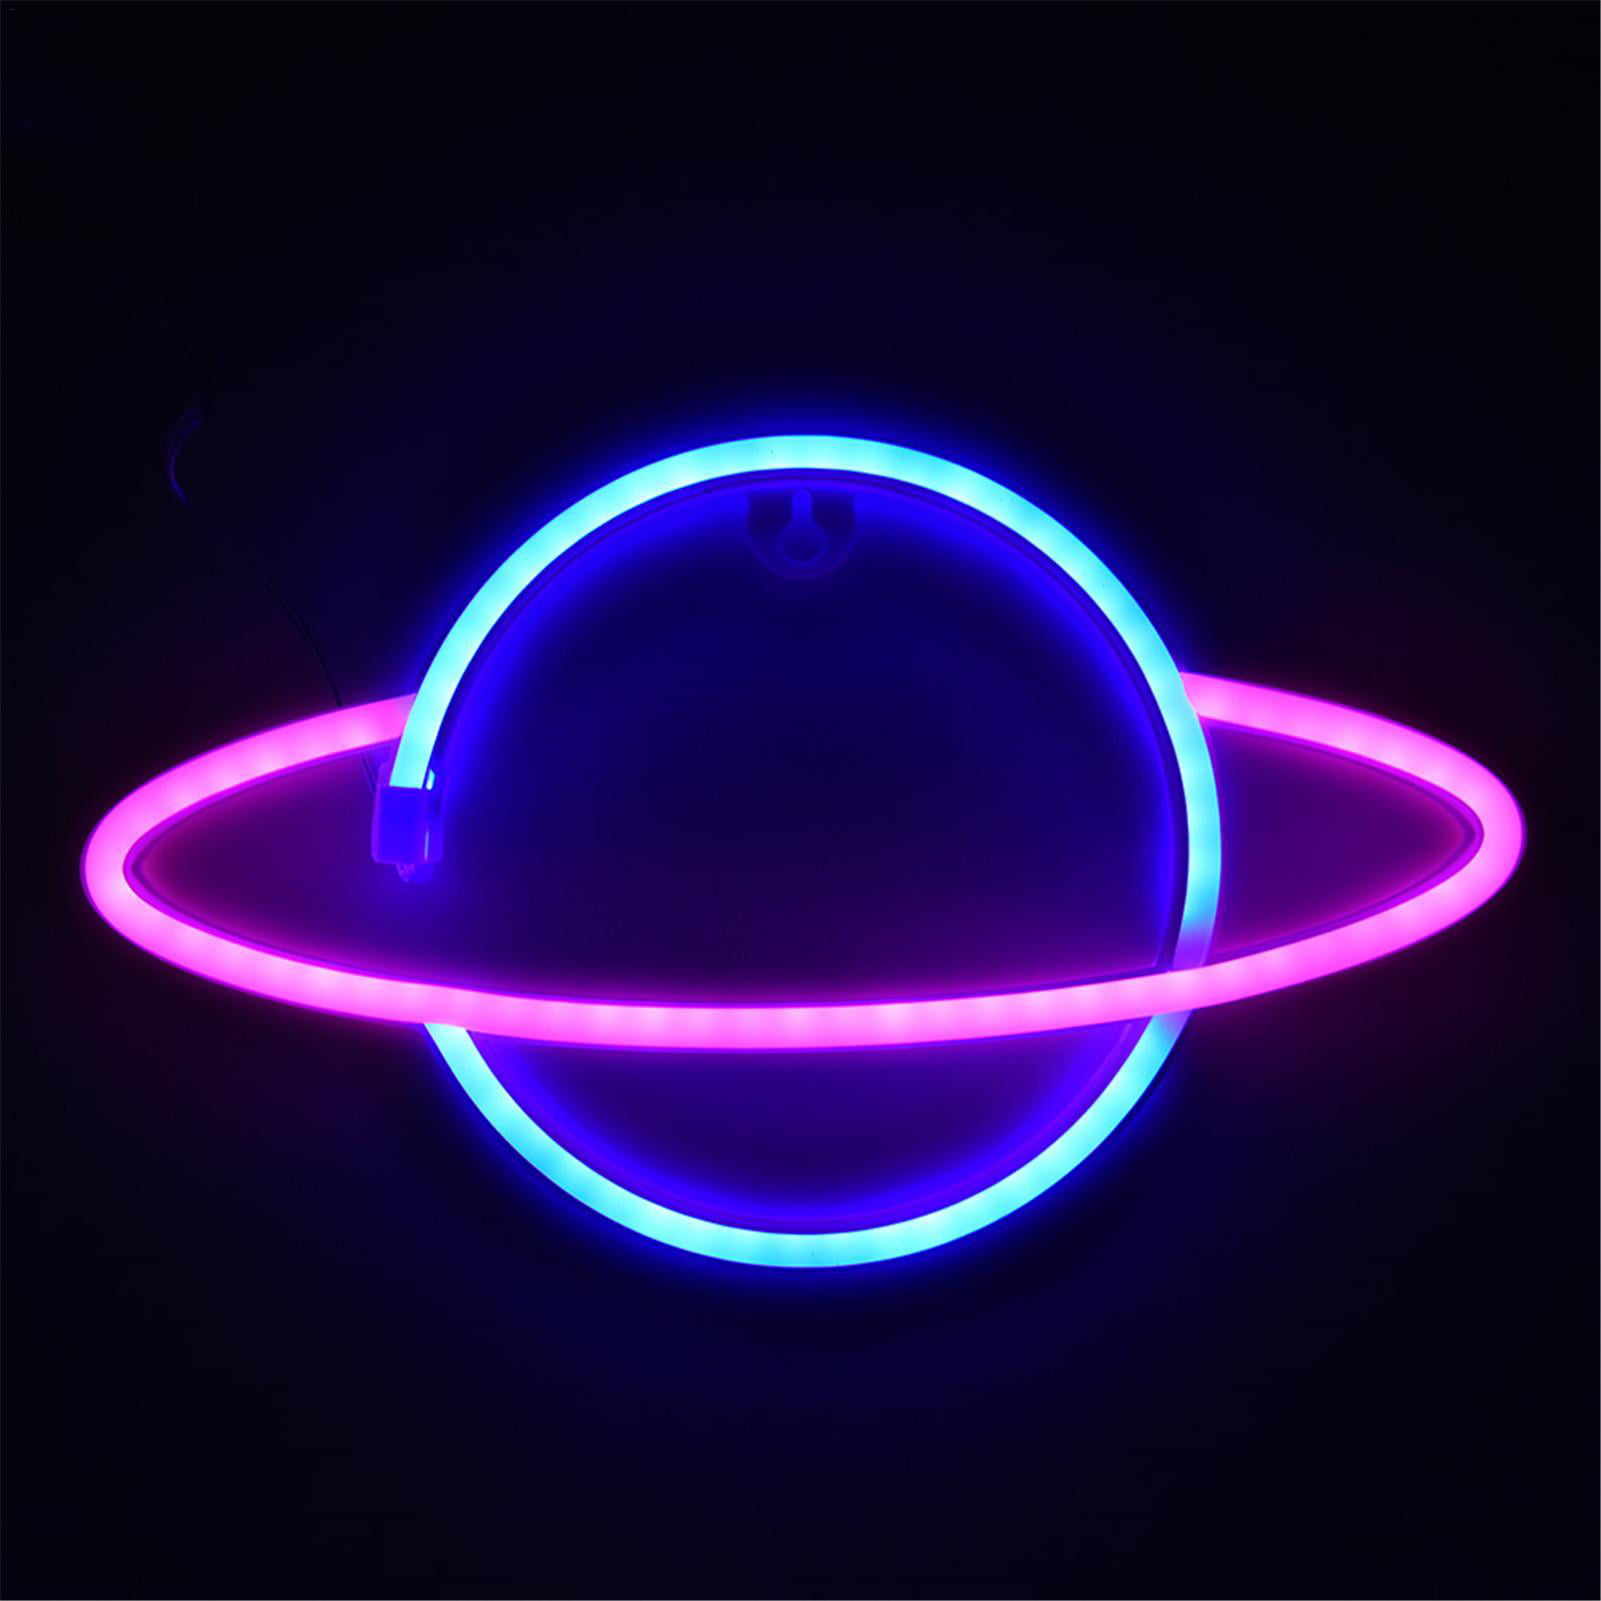 Led Planet Neon Light Signs Usb Or Battery Powered Soft Night Light